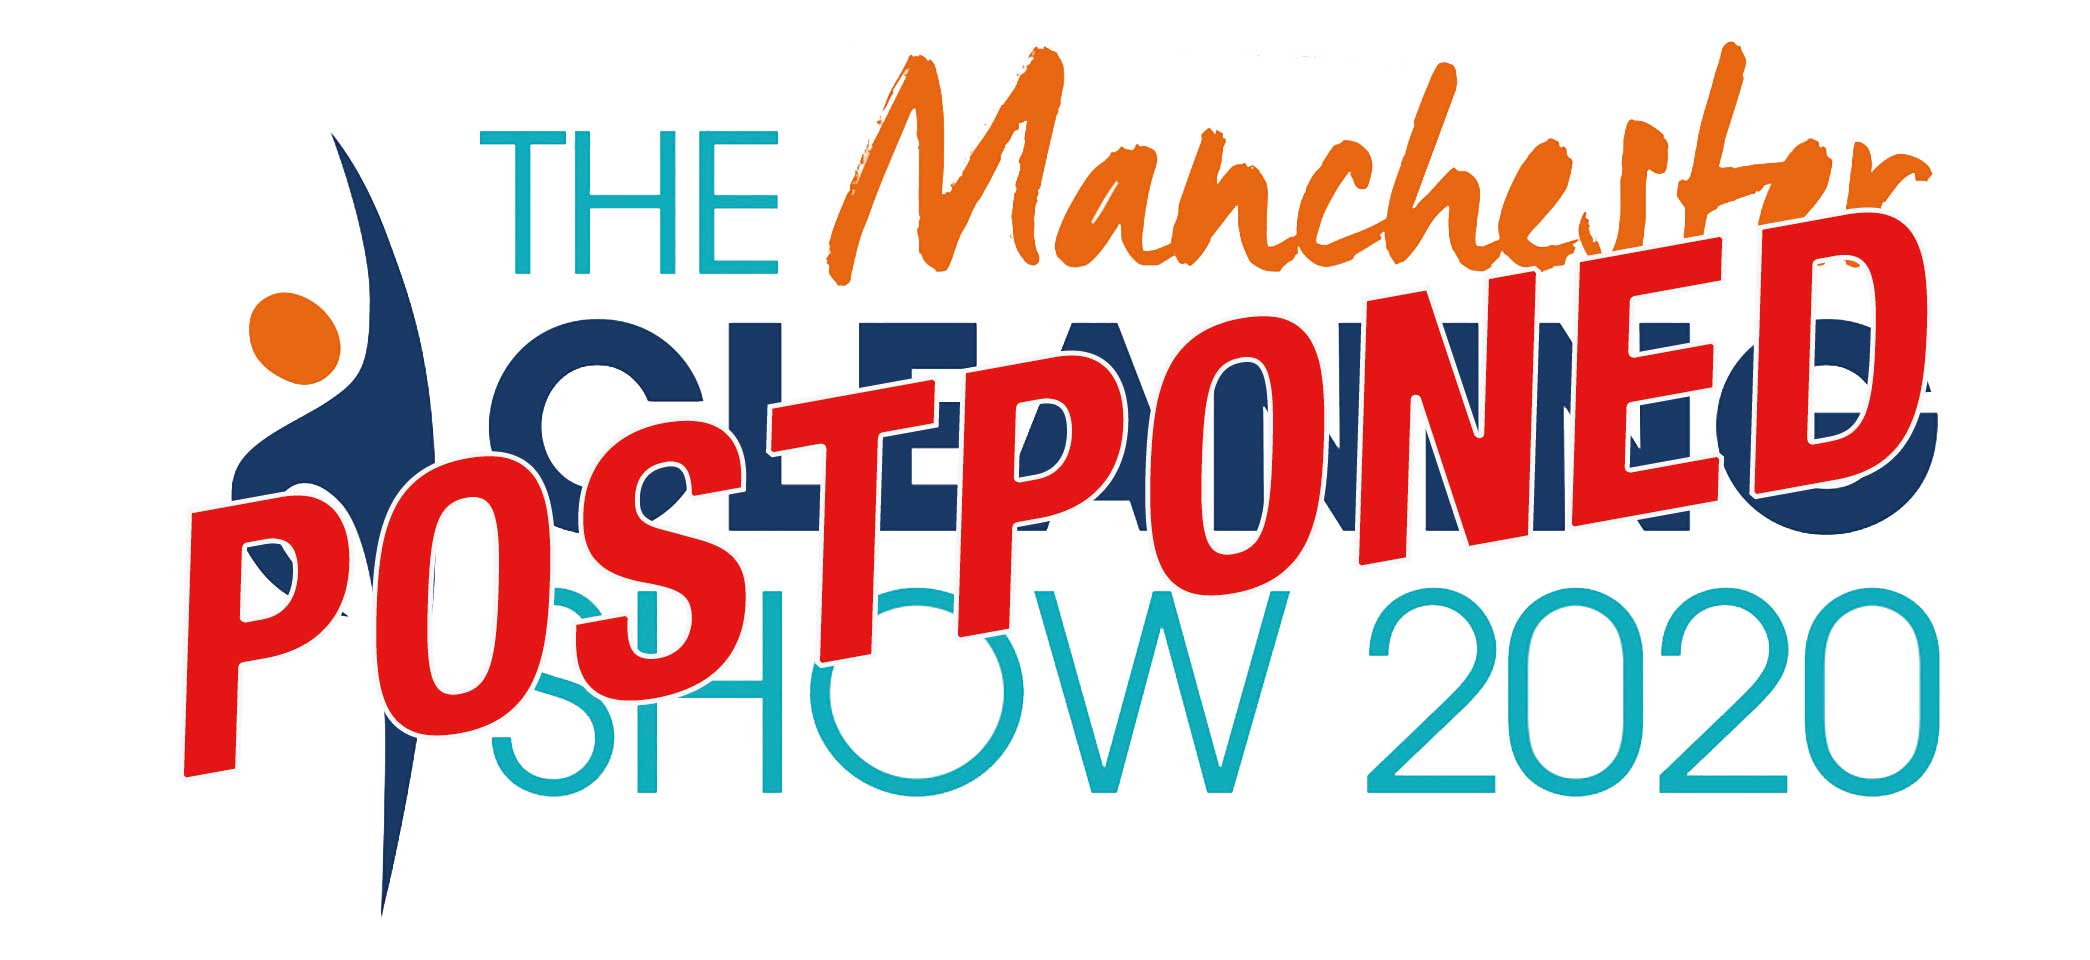 Manchester Cleaning Show logo postponed